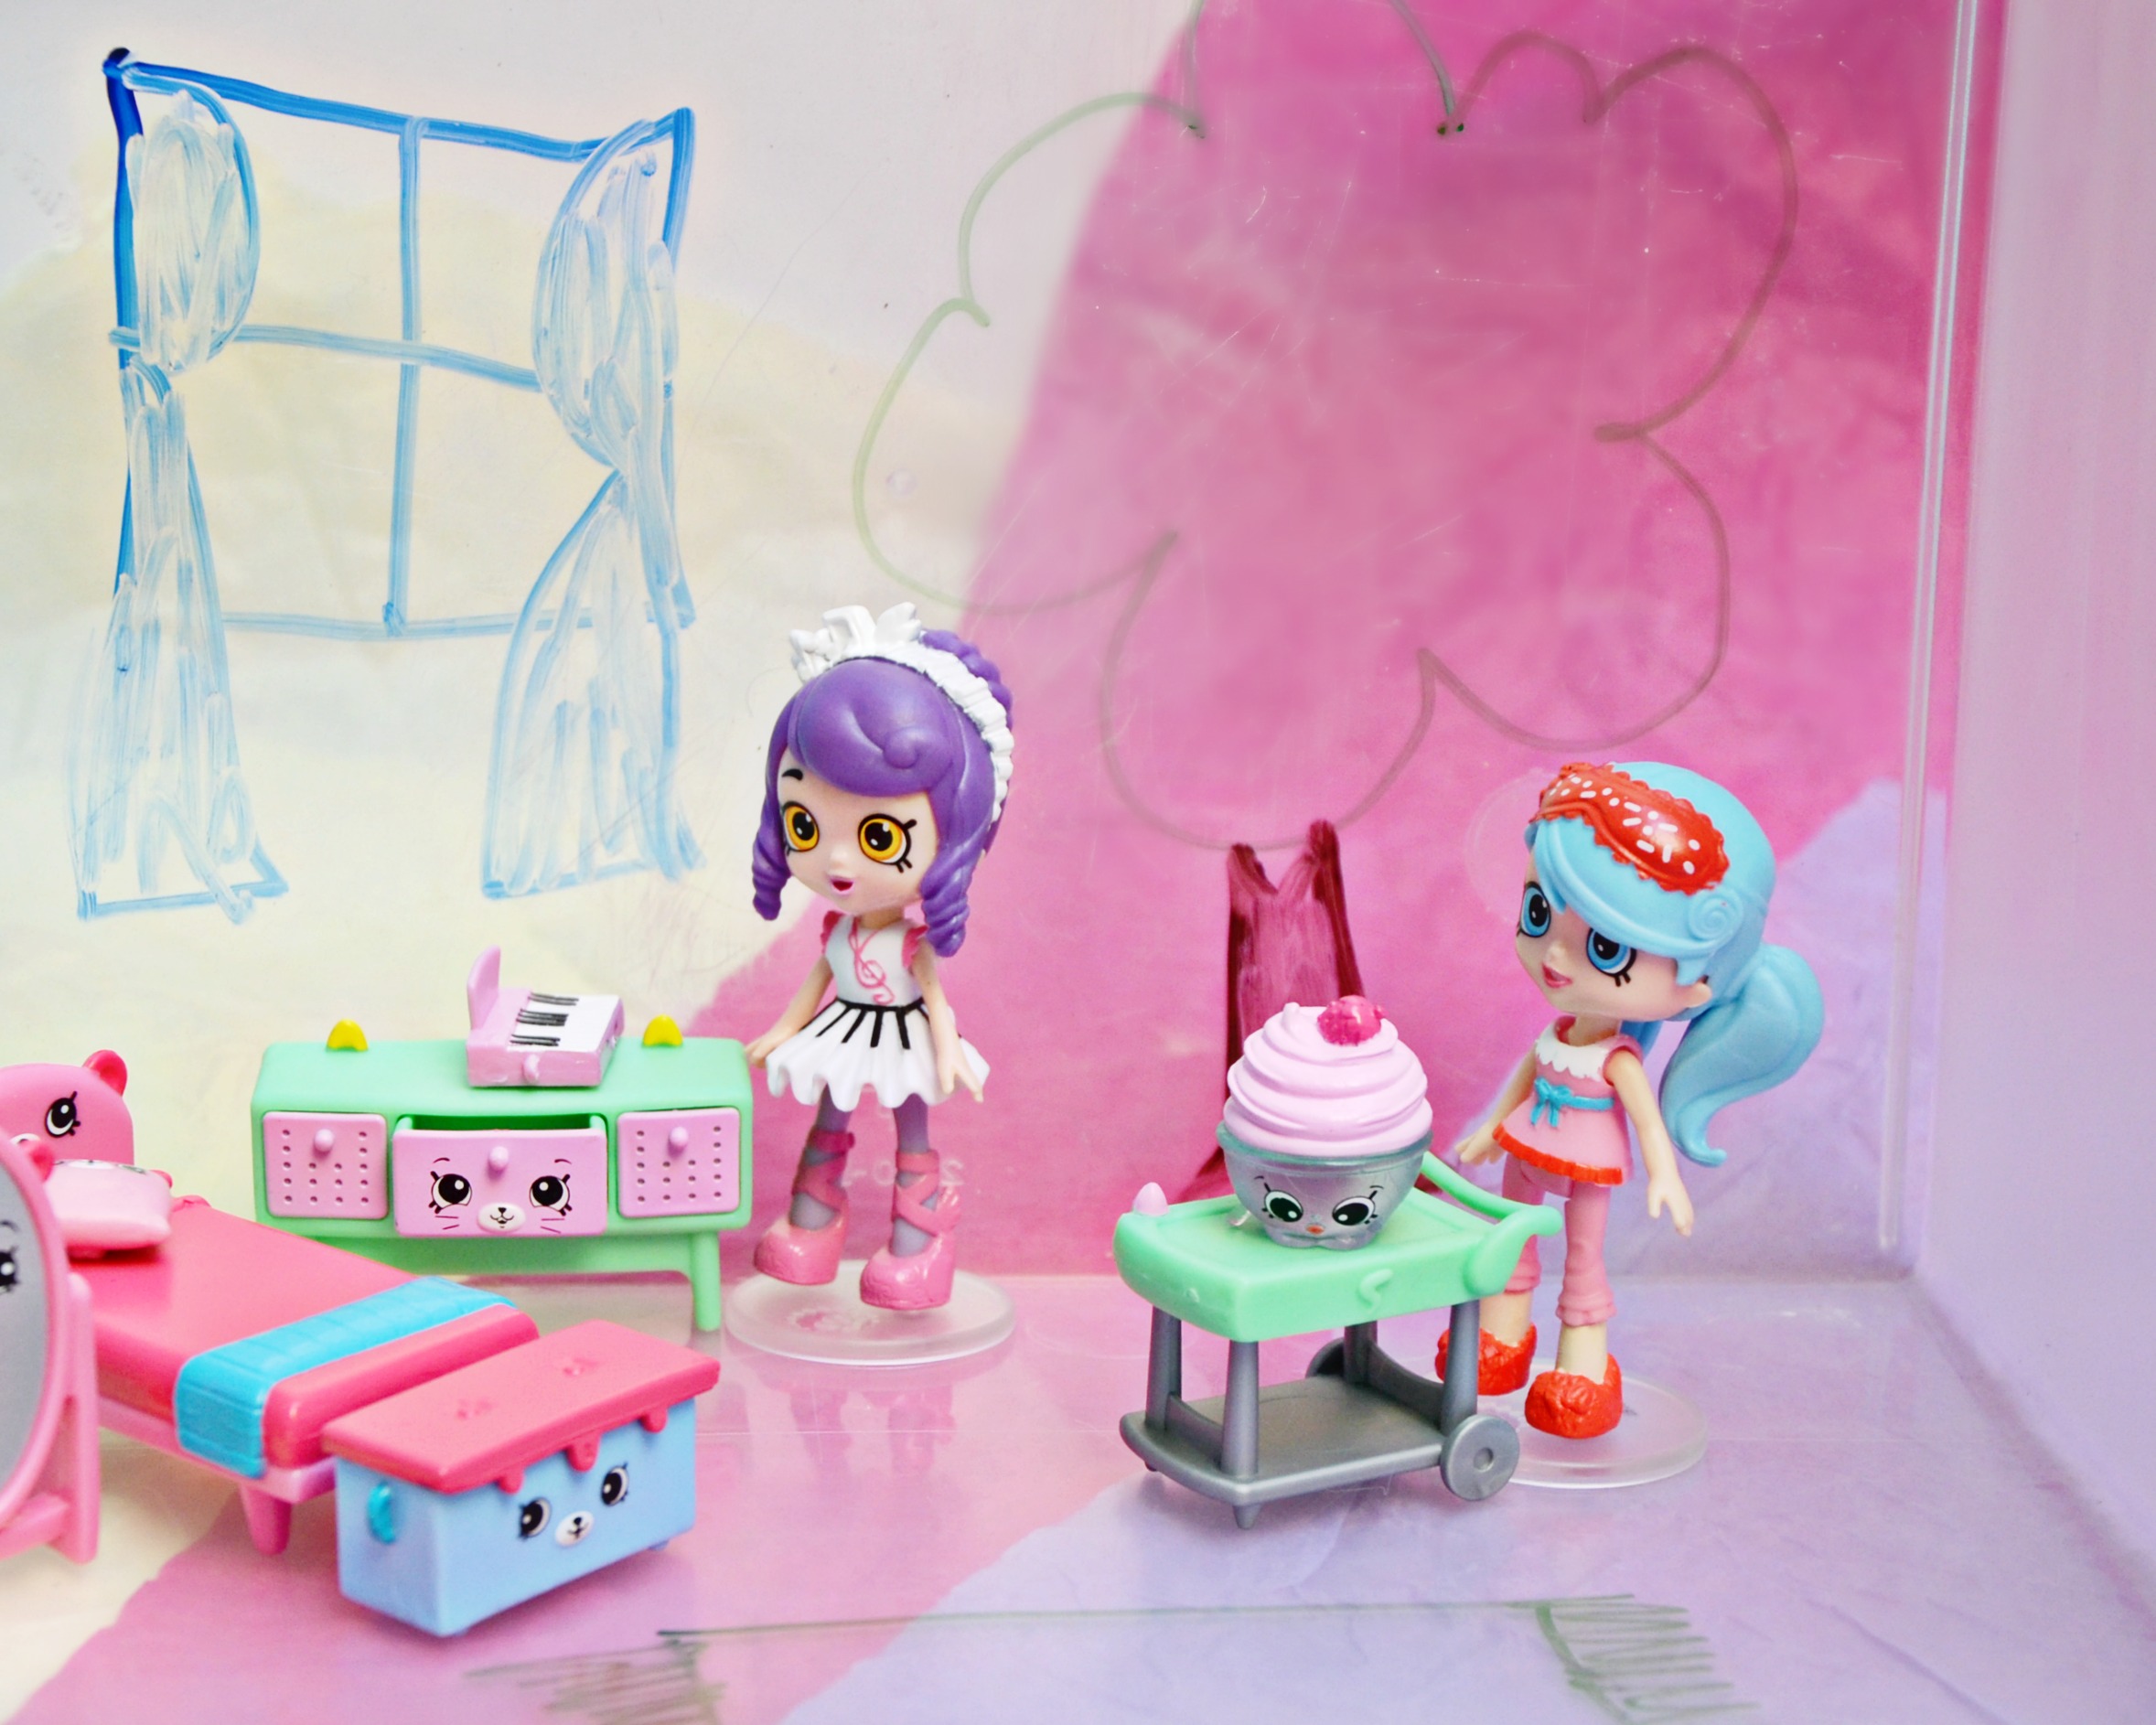 Shopkins storage and play